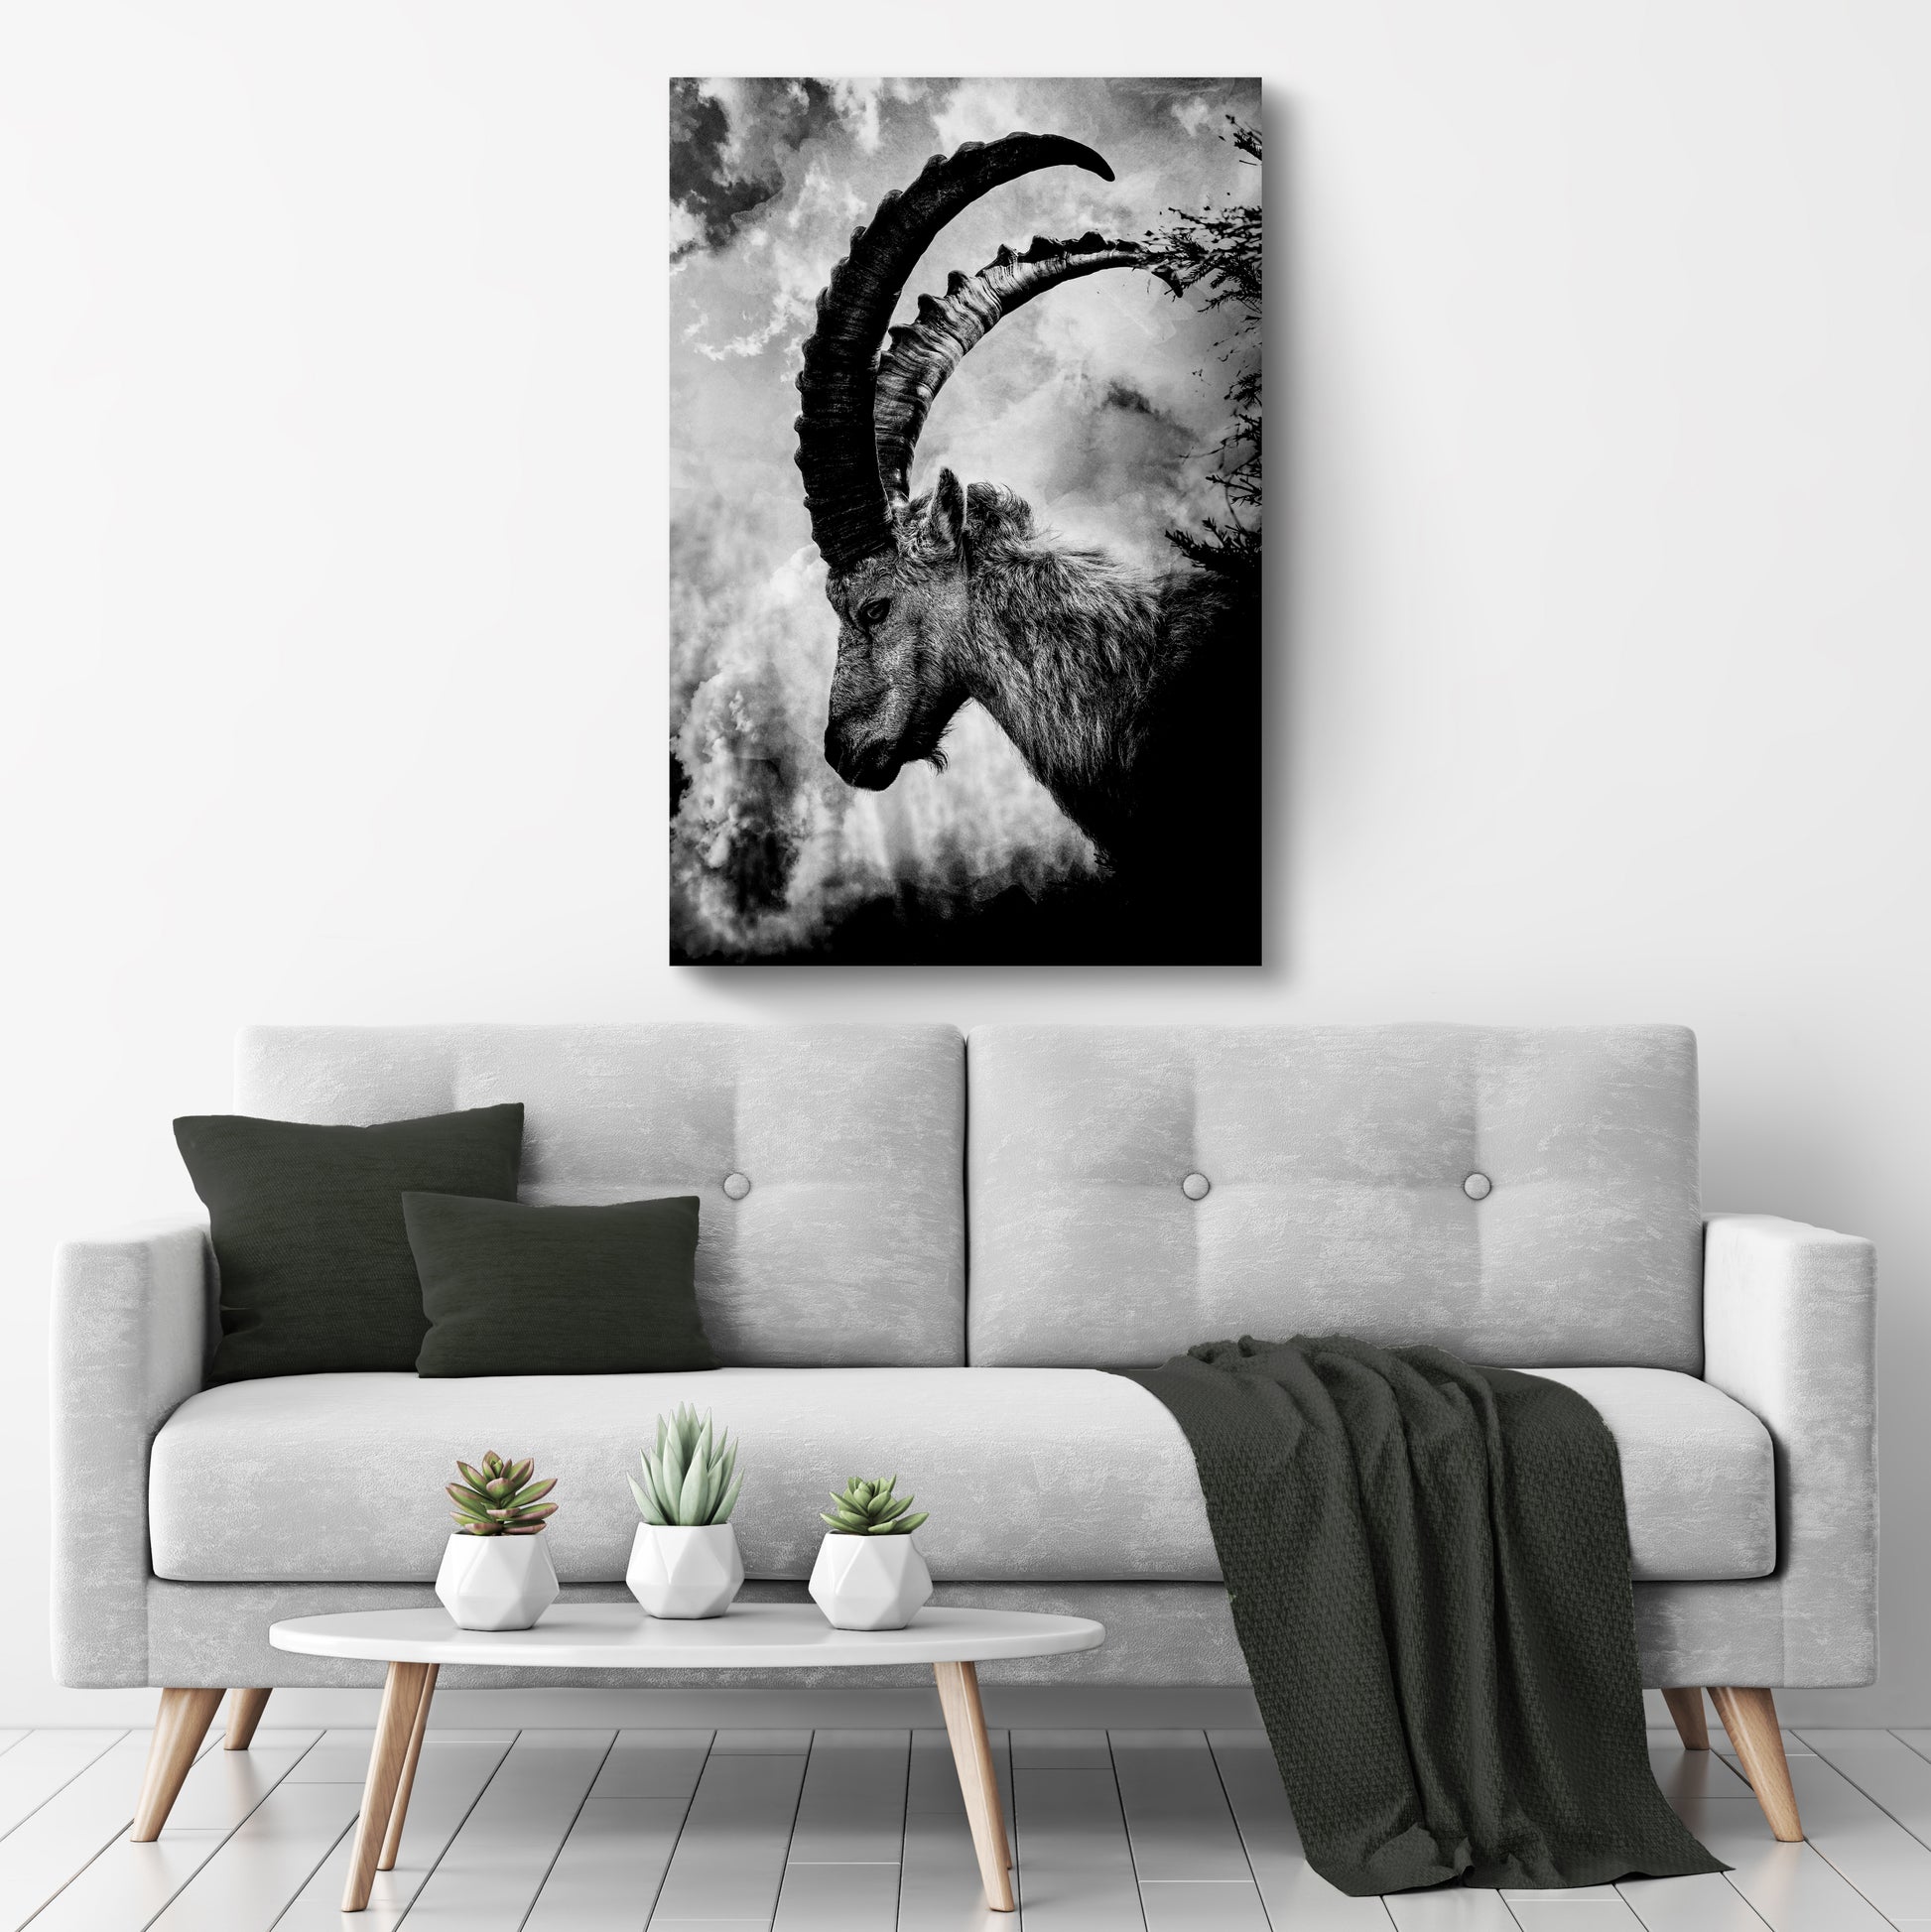 Monochrome Long Horned Goat Canvas Wall Art Style 2 - Image by Tailored Canvases